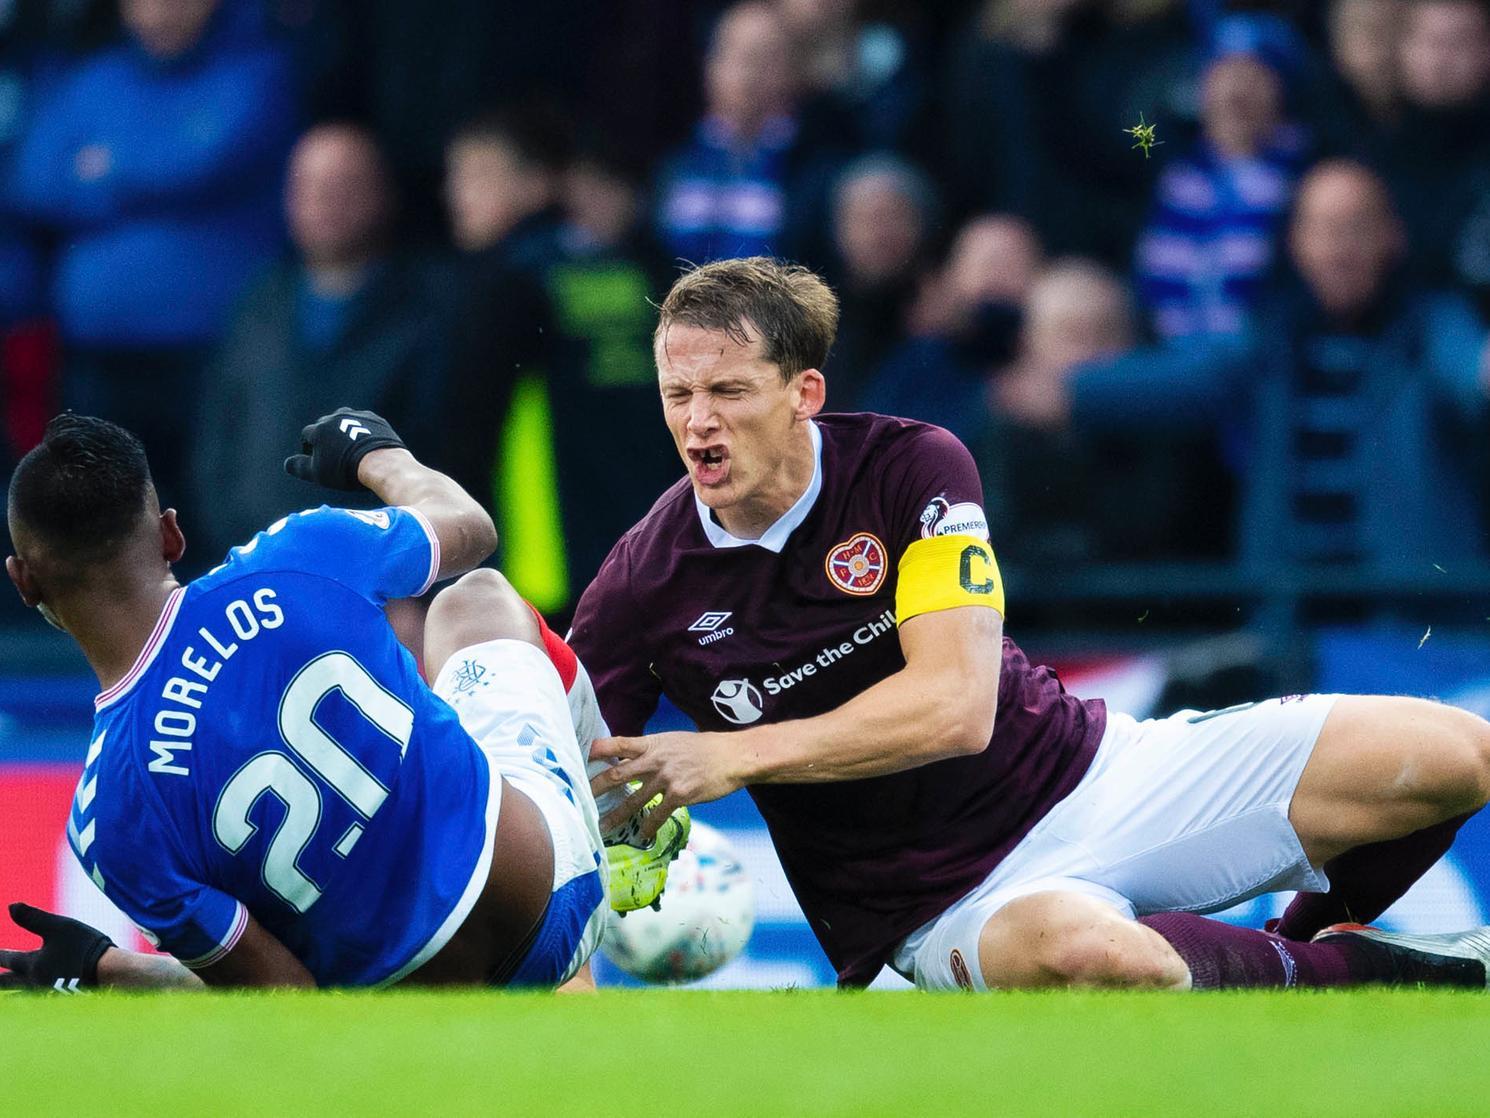 Hearts best player. Defended strongly in the first half and did well to try and keep things respectable as the linchpin of a makeshift defence in the closing half hour.